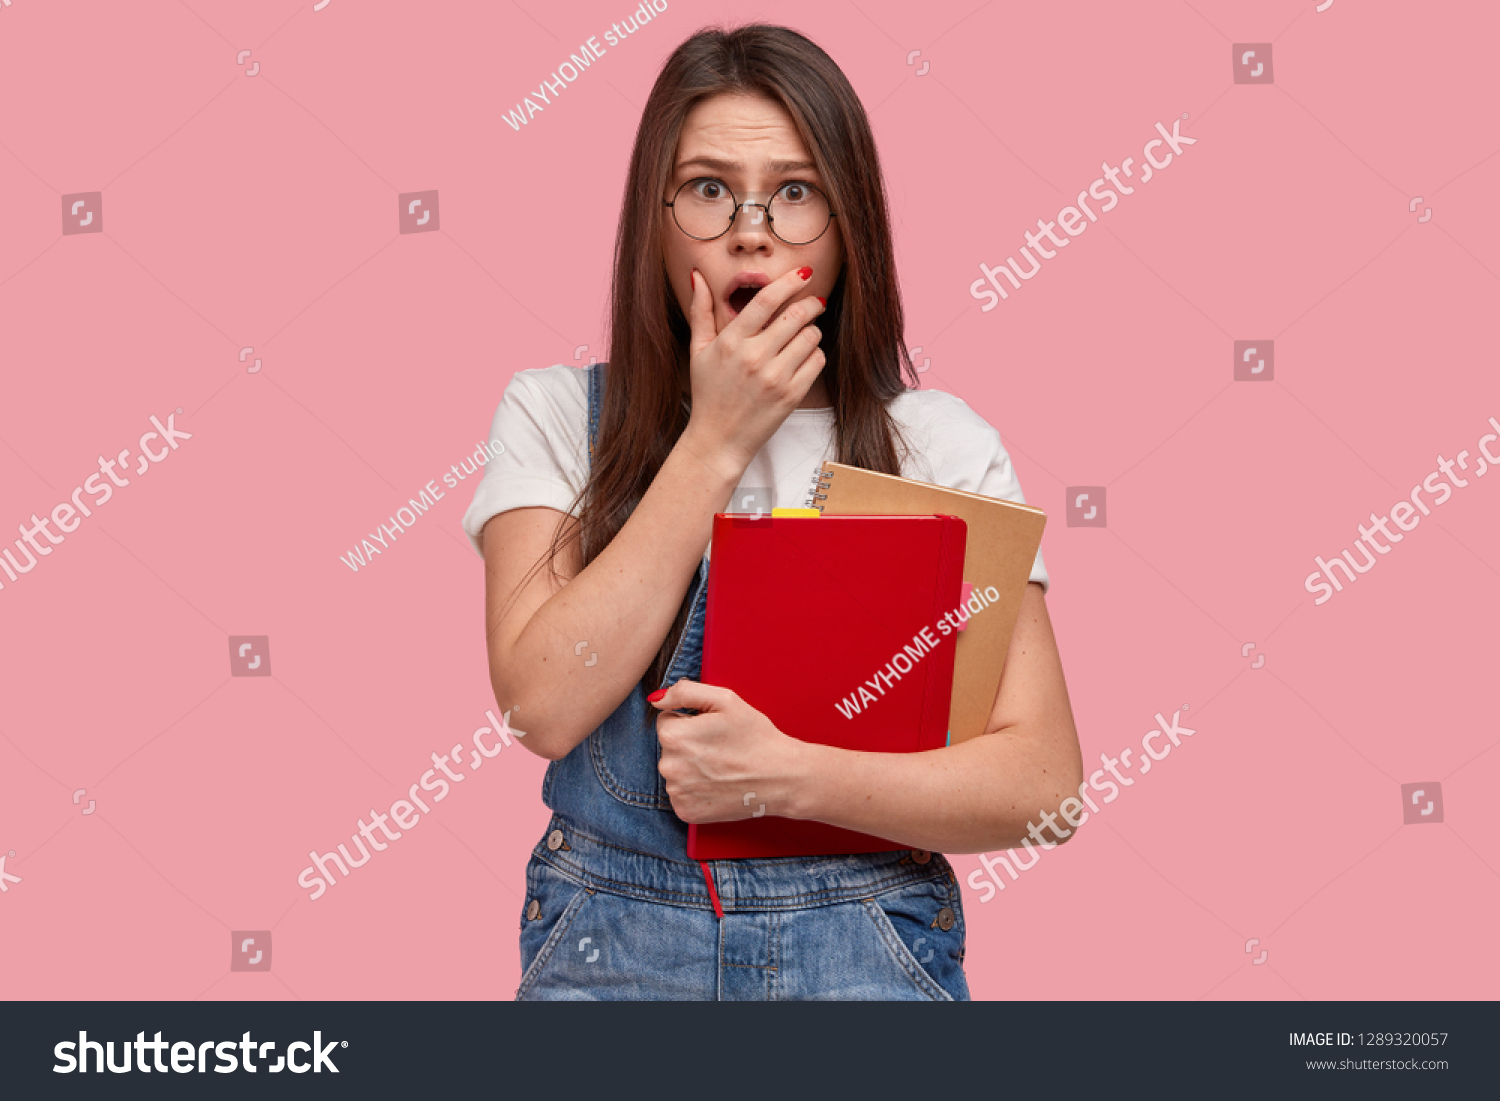 Emotive freckled woman covers mouth, afraids of scarying scene, carries notepad, wears casual white t shirt and overalls, poses against pink background. People, studying and emotions concept #1289320057